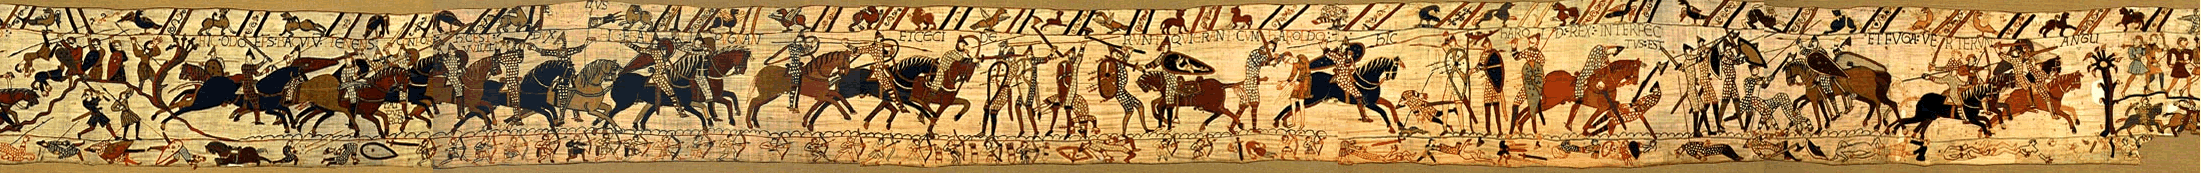 Image Of The Full Bayeux Tapestry